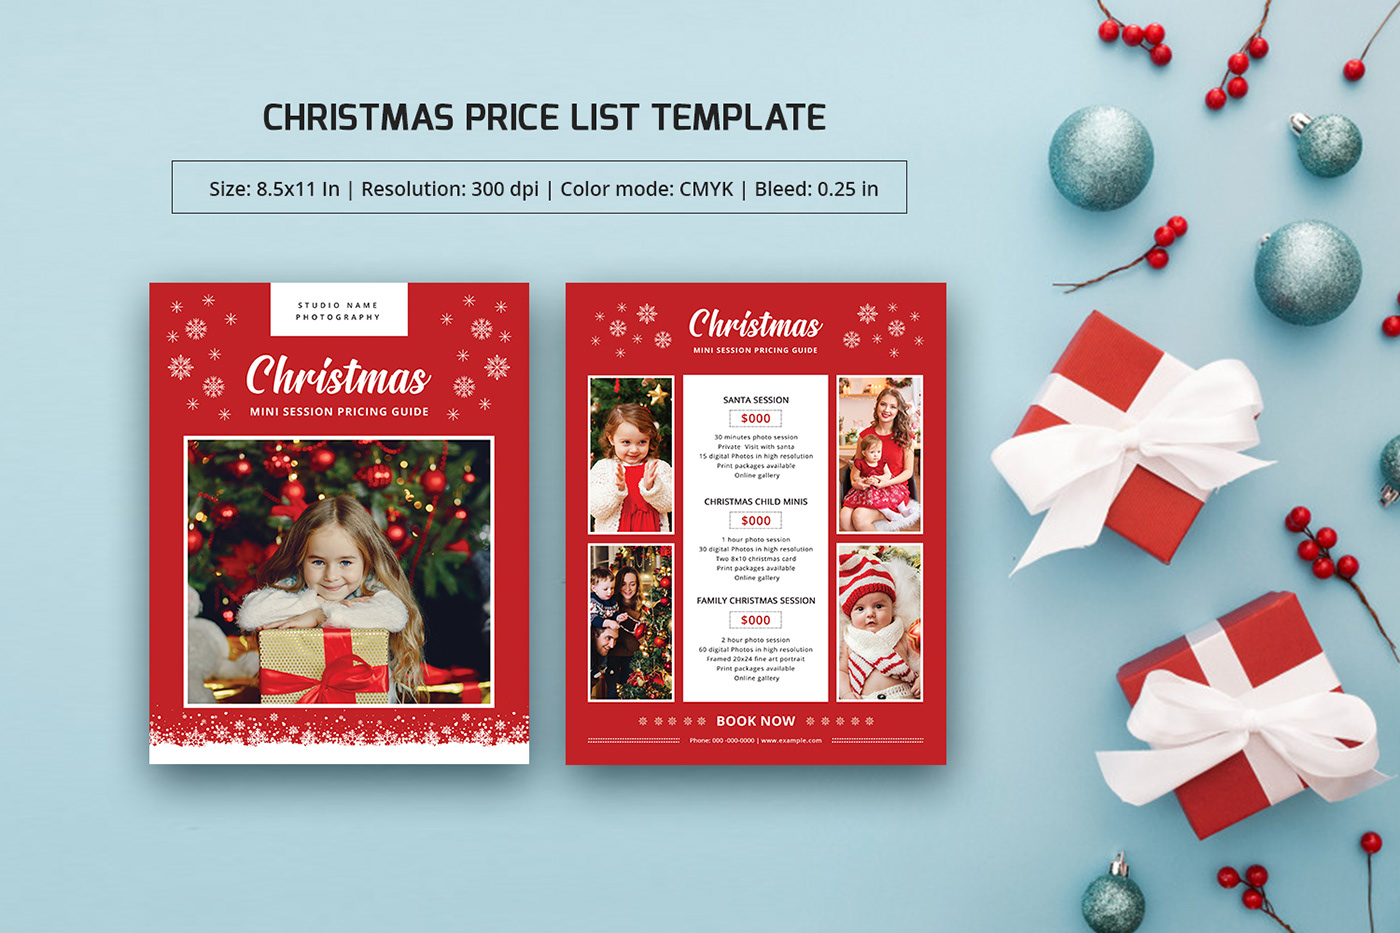 pricing guide Christmas price list